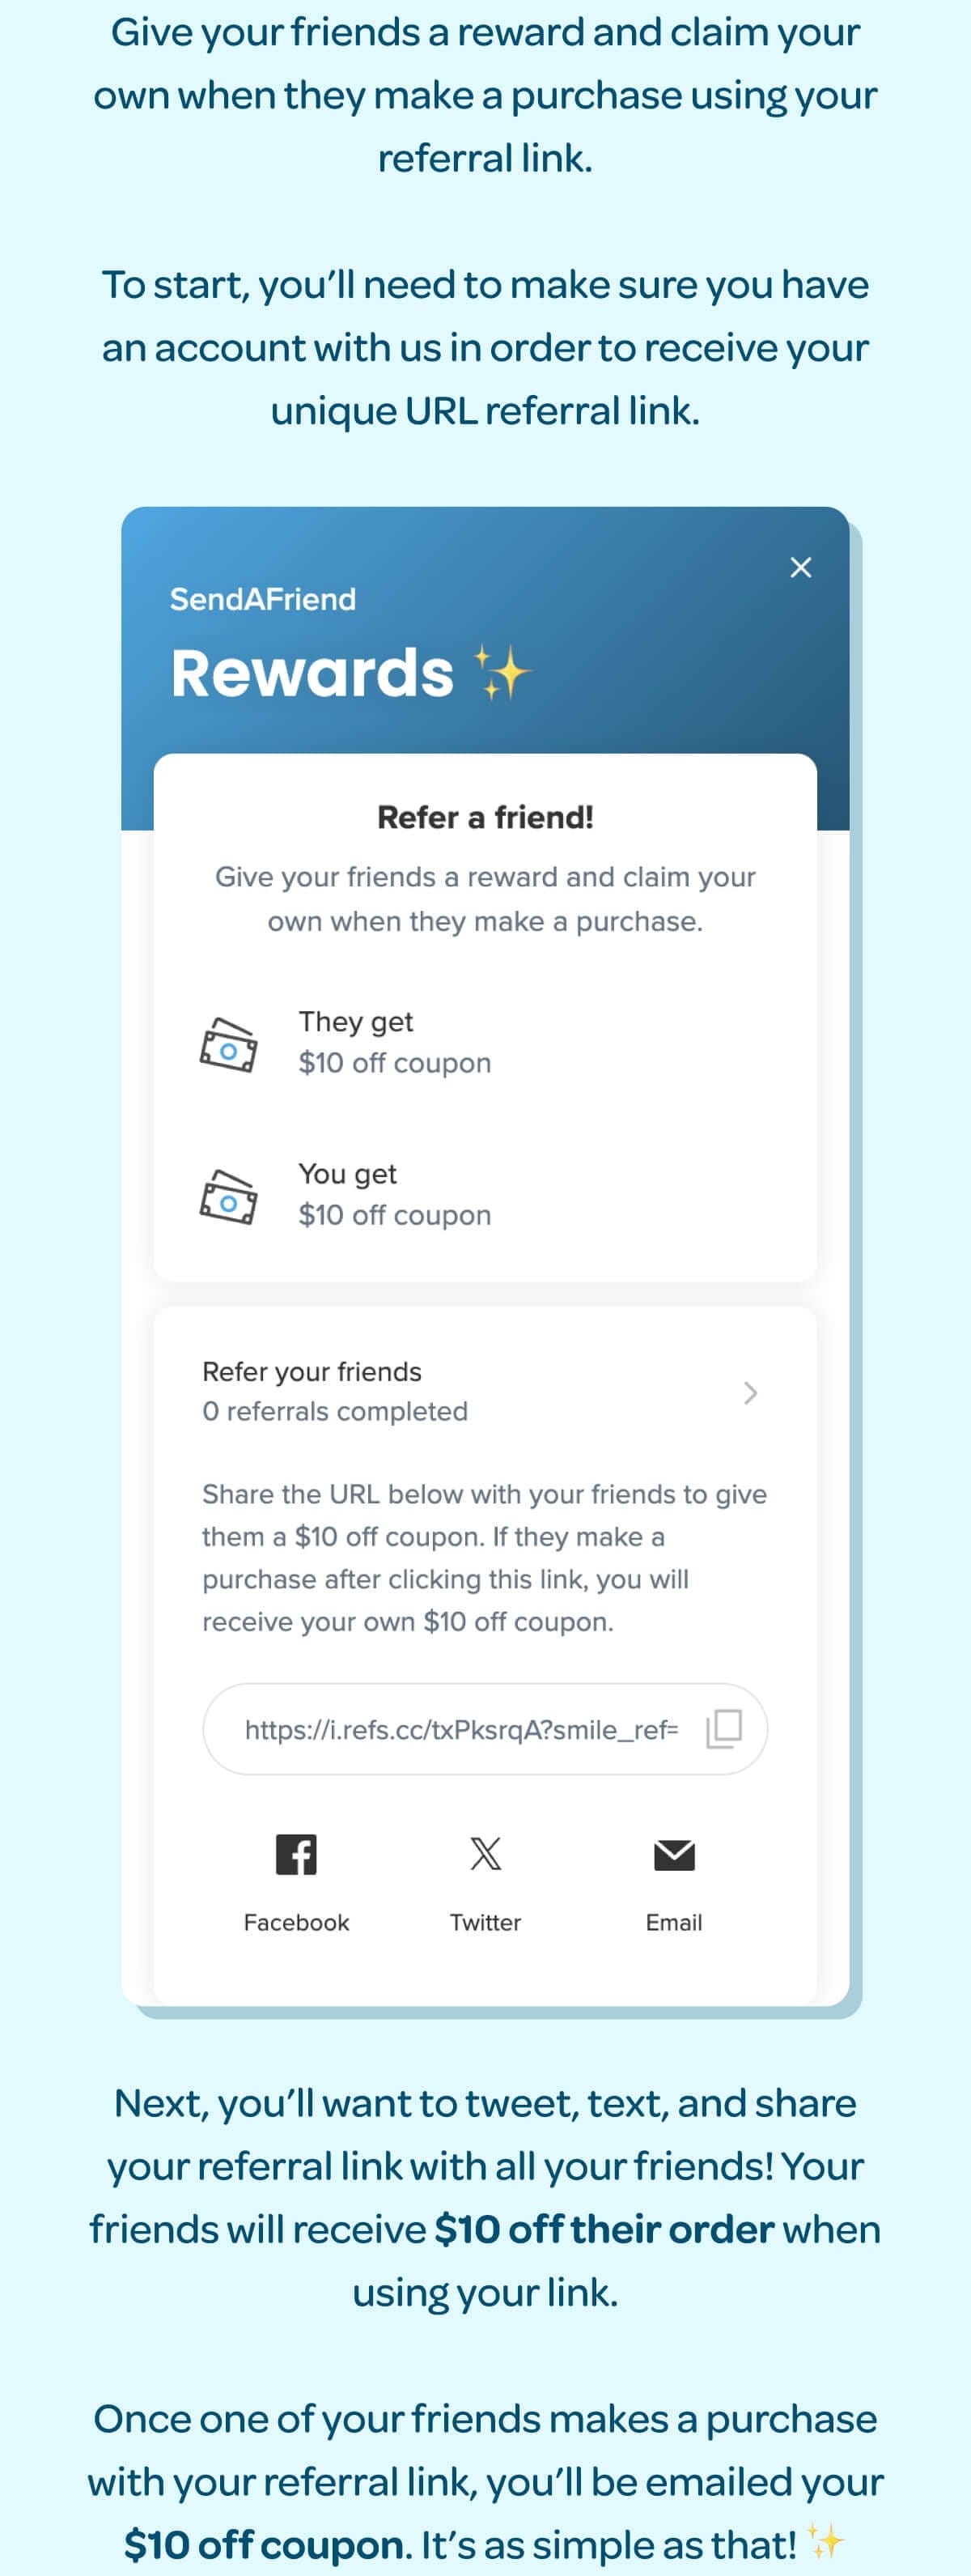 Give your friends a reward and claim your own when they make a purchase using your referral link. To start, you’ll need to make sure you have an account with us in order to receive your unique URL referral link. Next, you’ll want to tweet, text, and share your referral link with all your friends! Your friends will receive \\$10 off their order when using your link. Once one of your friends makes a purchase with your referral link, you’ll be emailed your \\$10 off coupon. It’s as simple as that! ✨